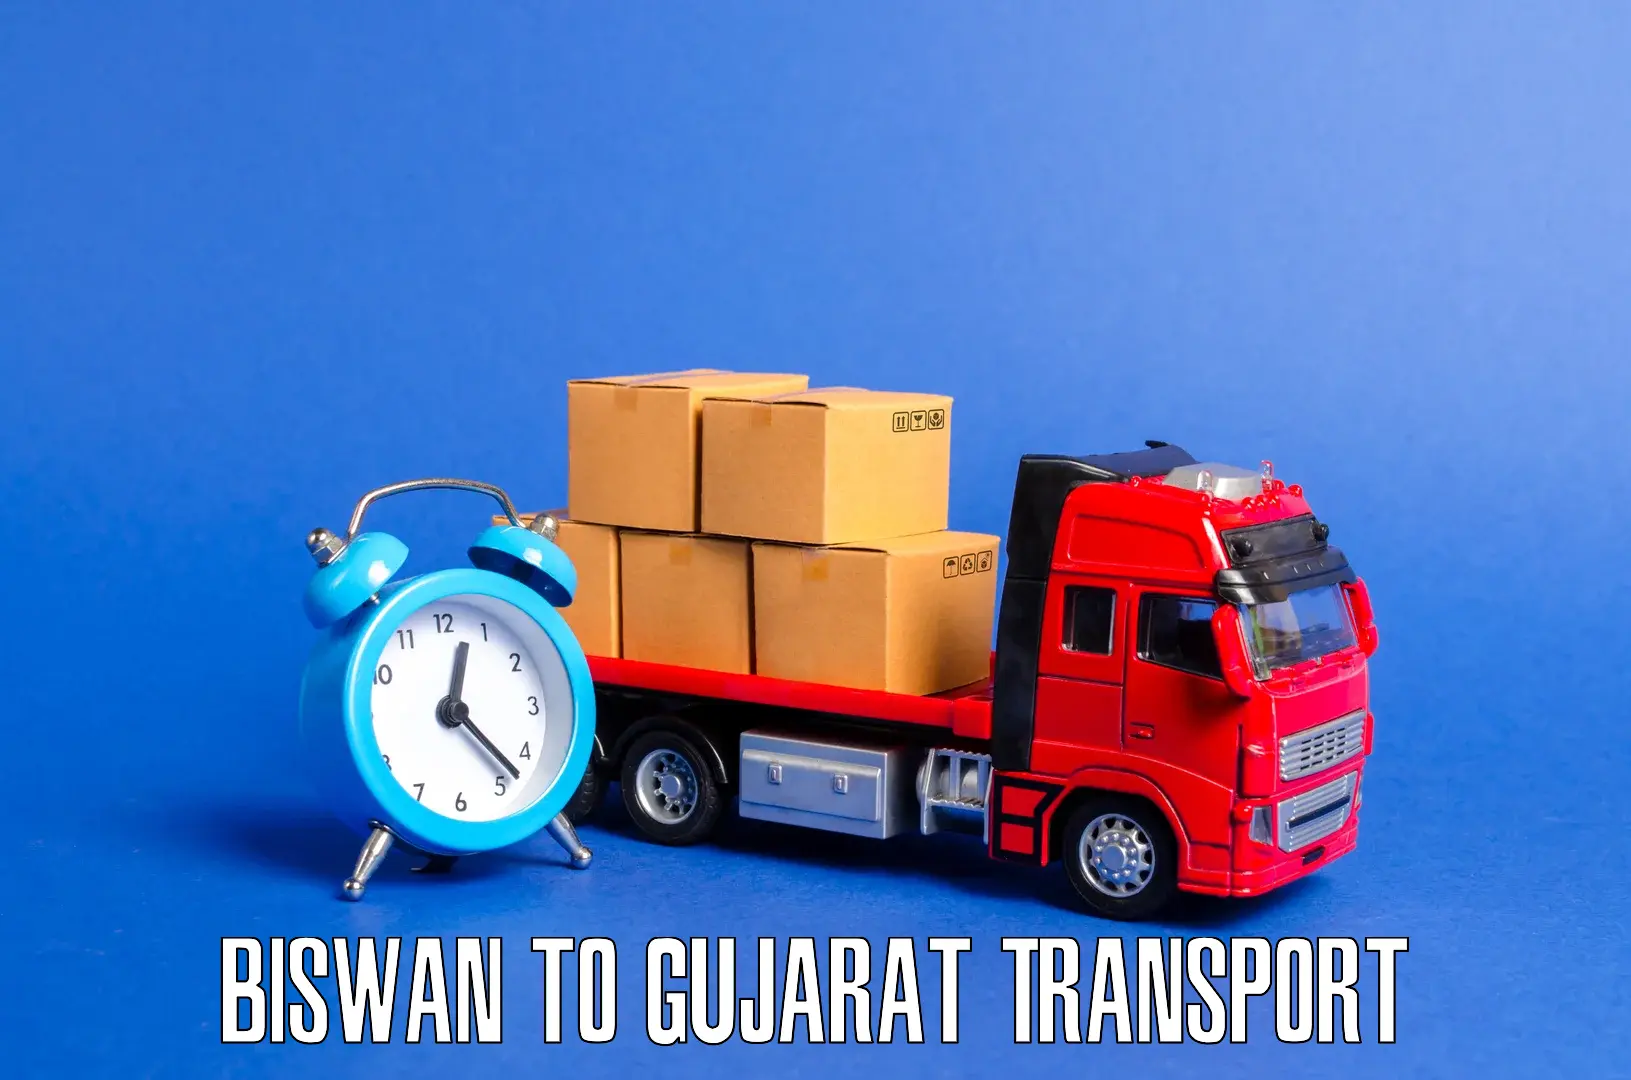 Transport bike from one state to another Biswan to Dwarka